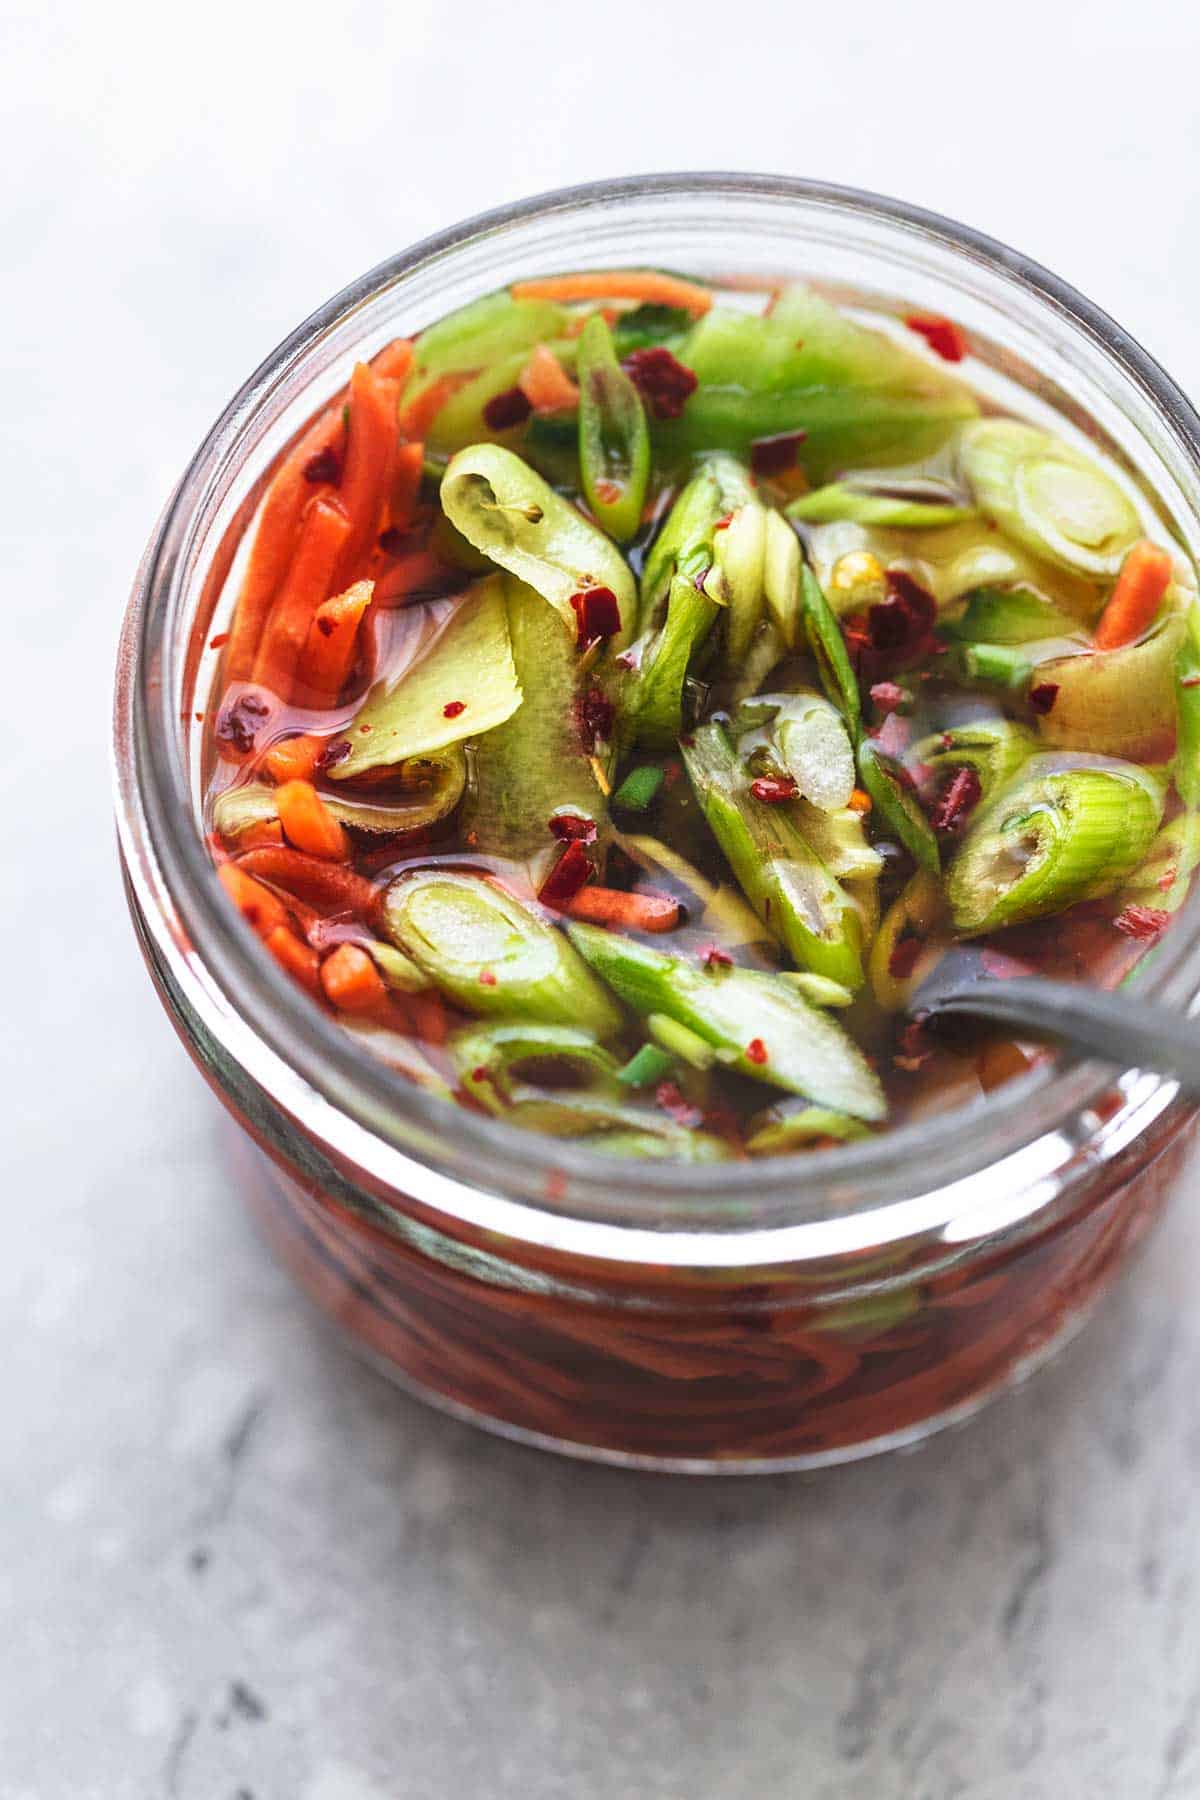 marinated vegetables with carrots, onions, and red pepper flakes in a glass jar.